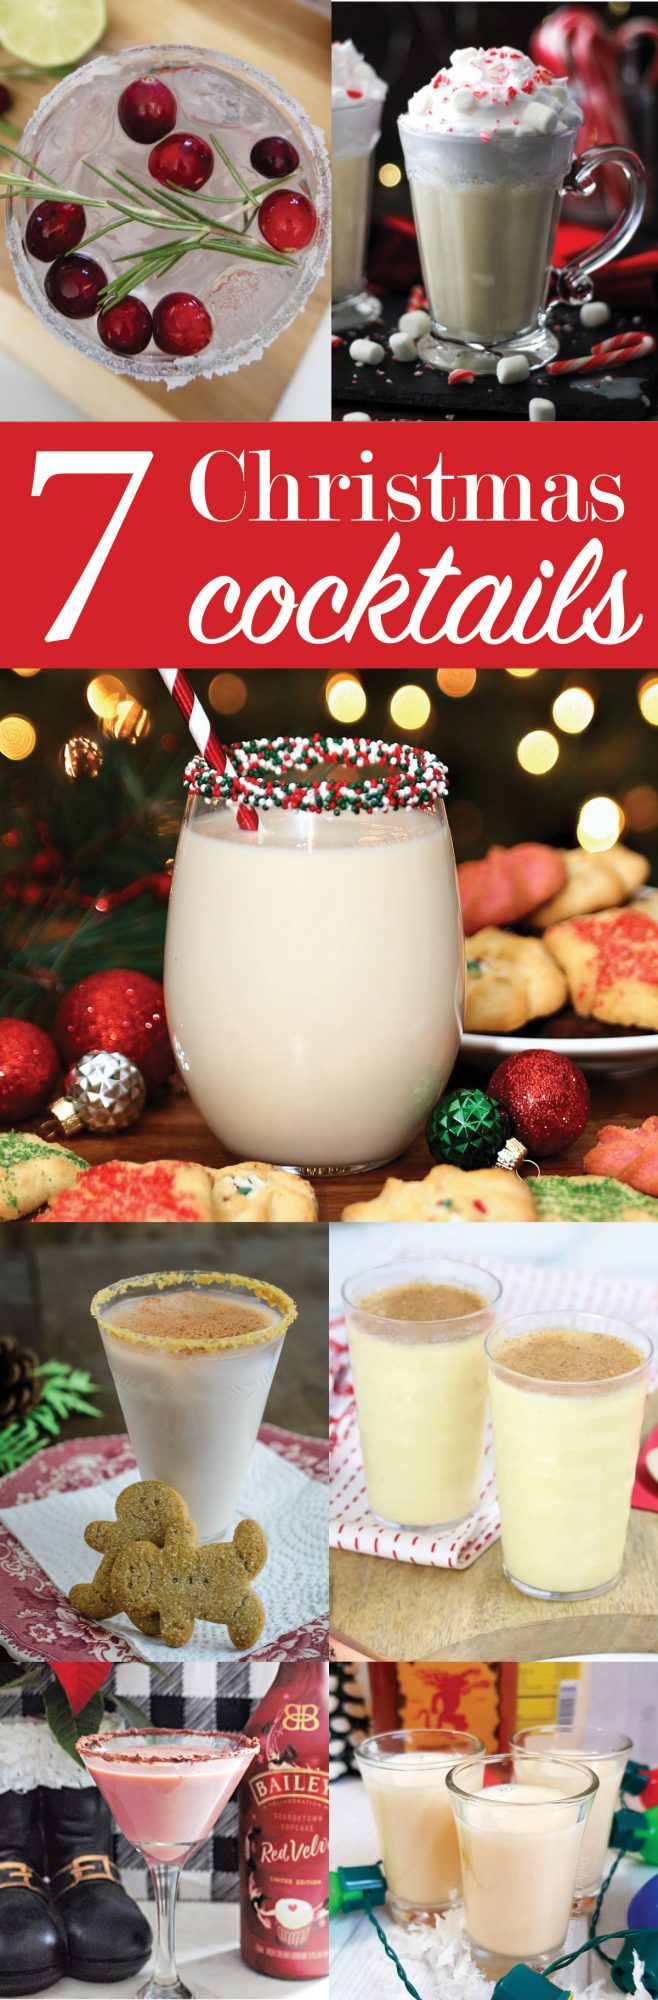 Cinnamon Fireball Eggnog Shots have just the right amount of kick for a Christmas cocktail. Creamy, rich eggnog and spicy cinnamon fireball whiskey combined together to make a delicious cocktail shot that just screams holiday fun! If you are looking for a quick and easy holiday cocktail, this two-ingredient mix is just what you are looking for.  #CocktailRecipes #ChristmasCocktails #FireballCocktails #Whiskey #EggnogDrinks #Fireball #HolidayCocktails